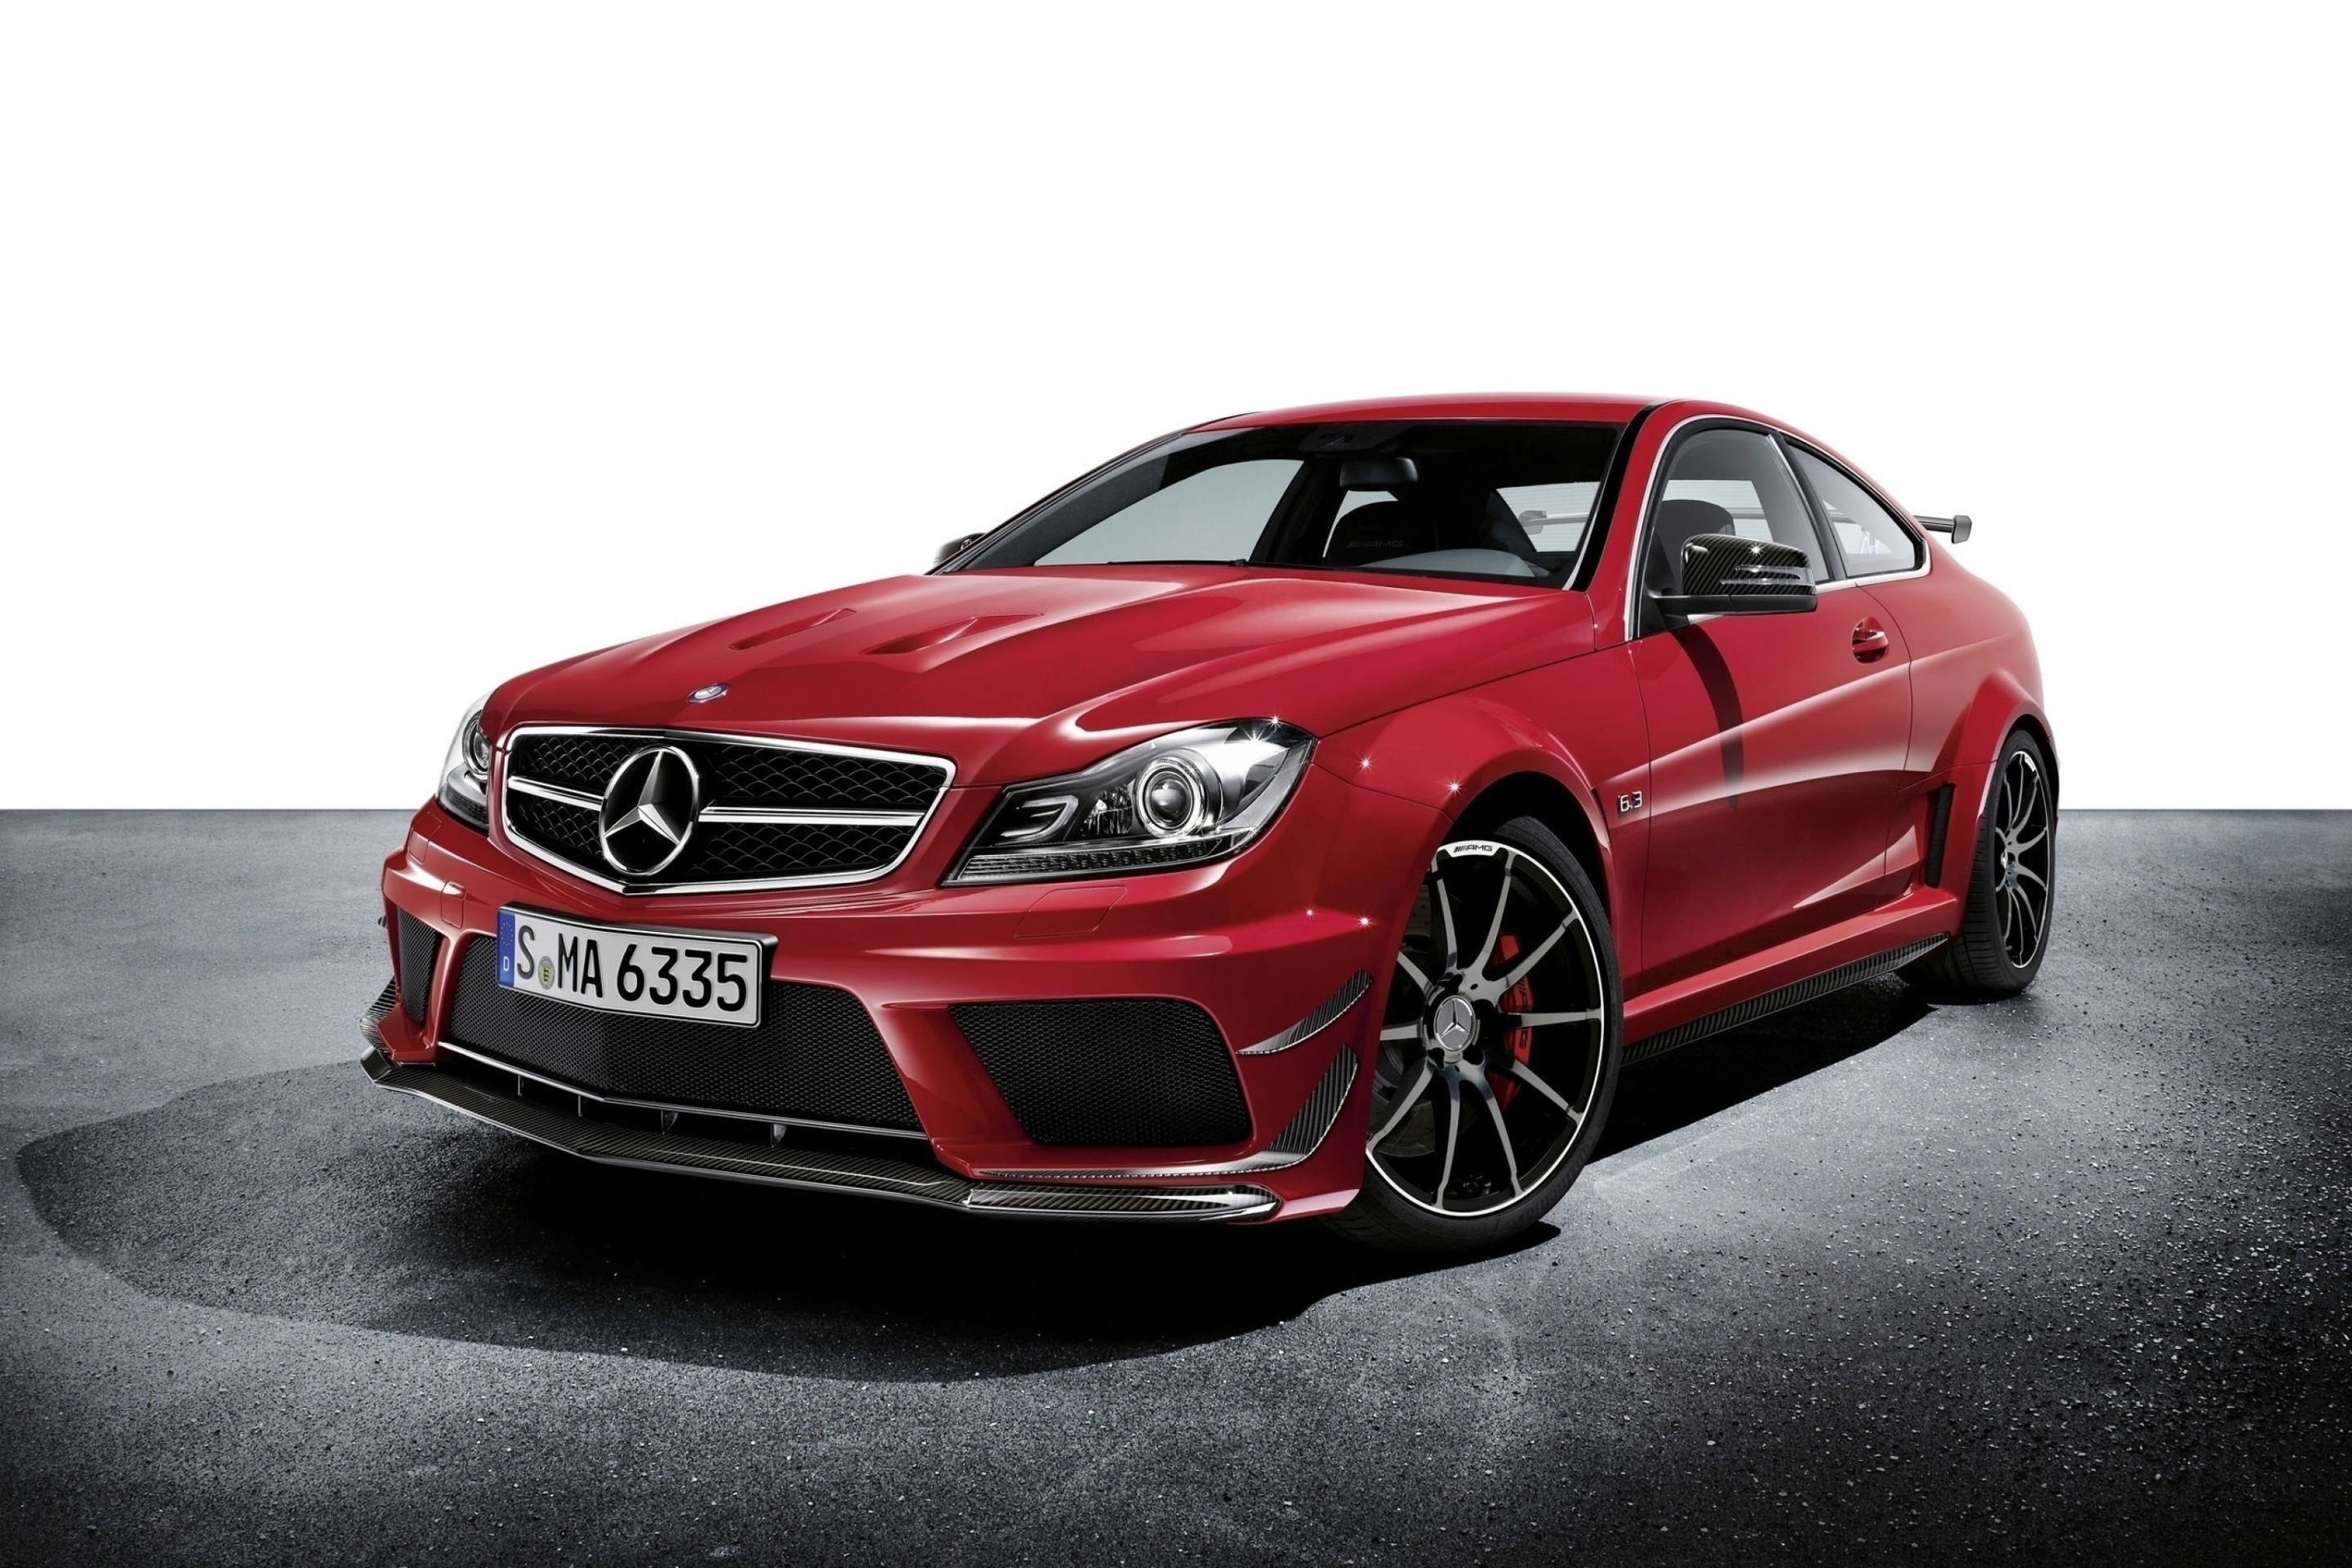 Mercedes C63 AMG Coupe wallpaper 2880x1920